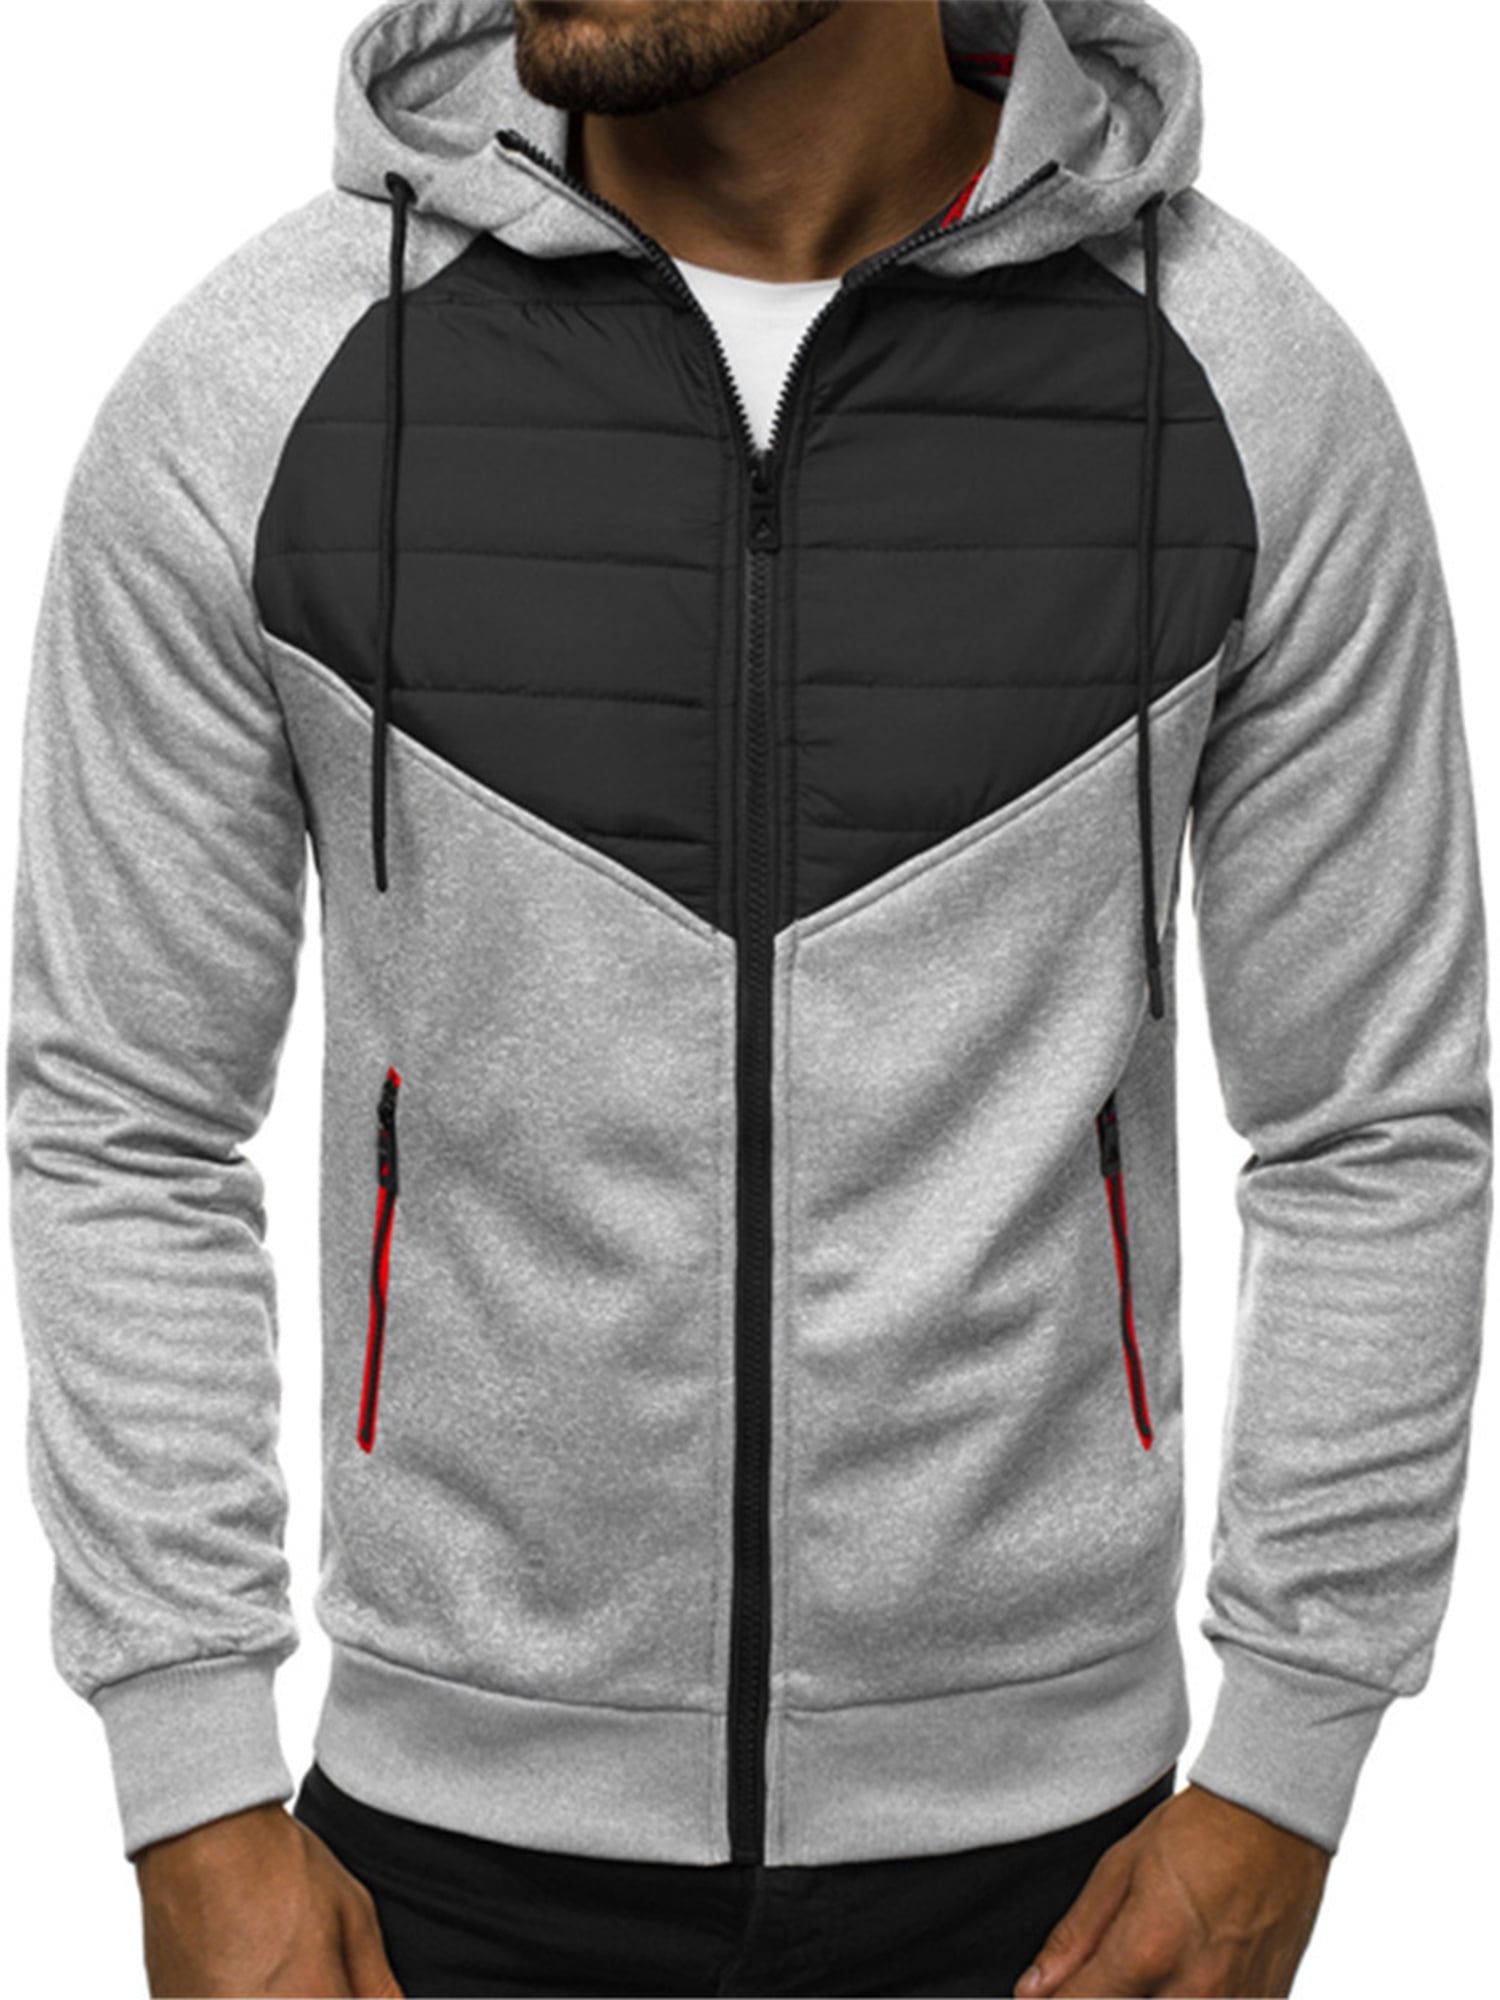 Fashion Hoodie for Men Full Zip Hooded Jackets, Mens Casual Workout ...